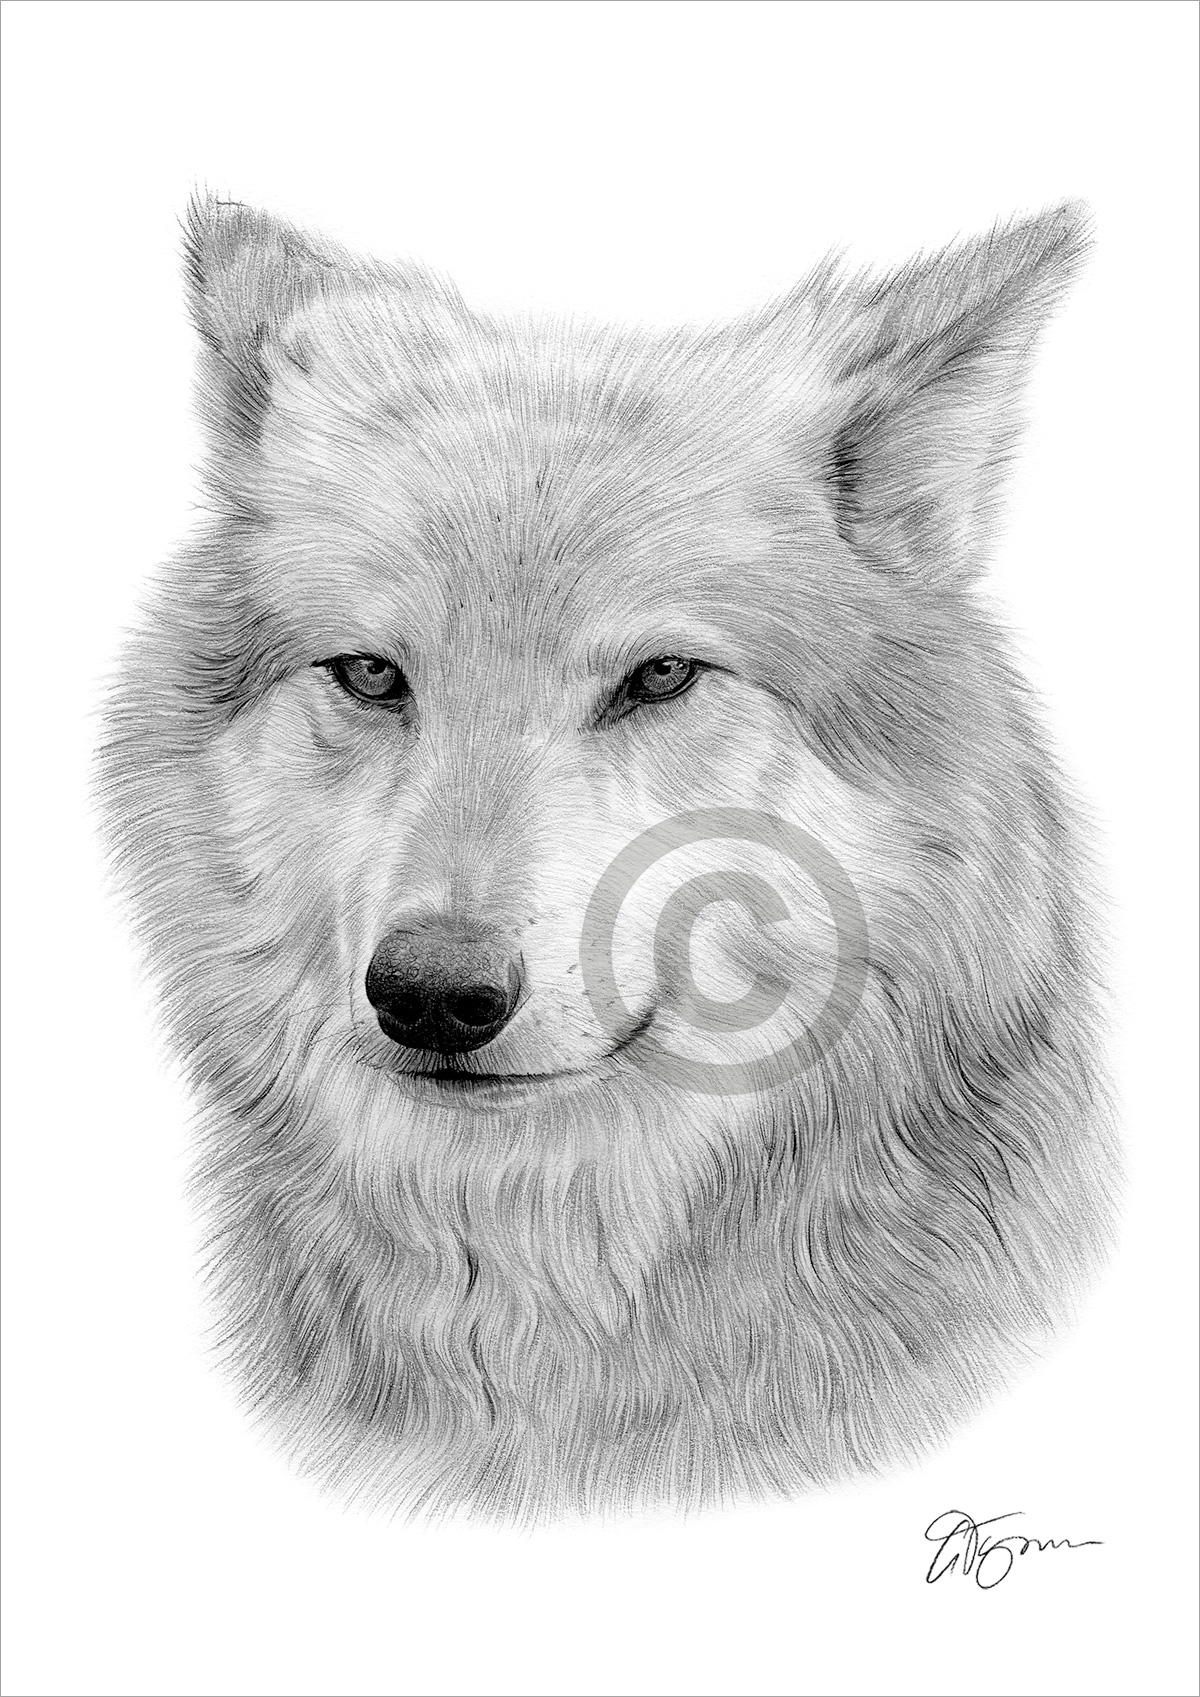 Pencil drawing of an adult grey wolf by artist Gary Tymon